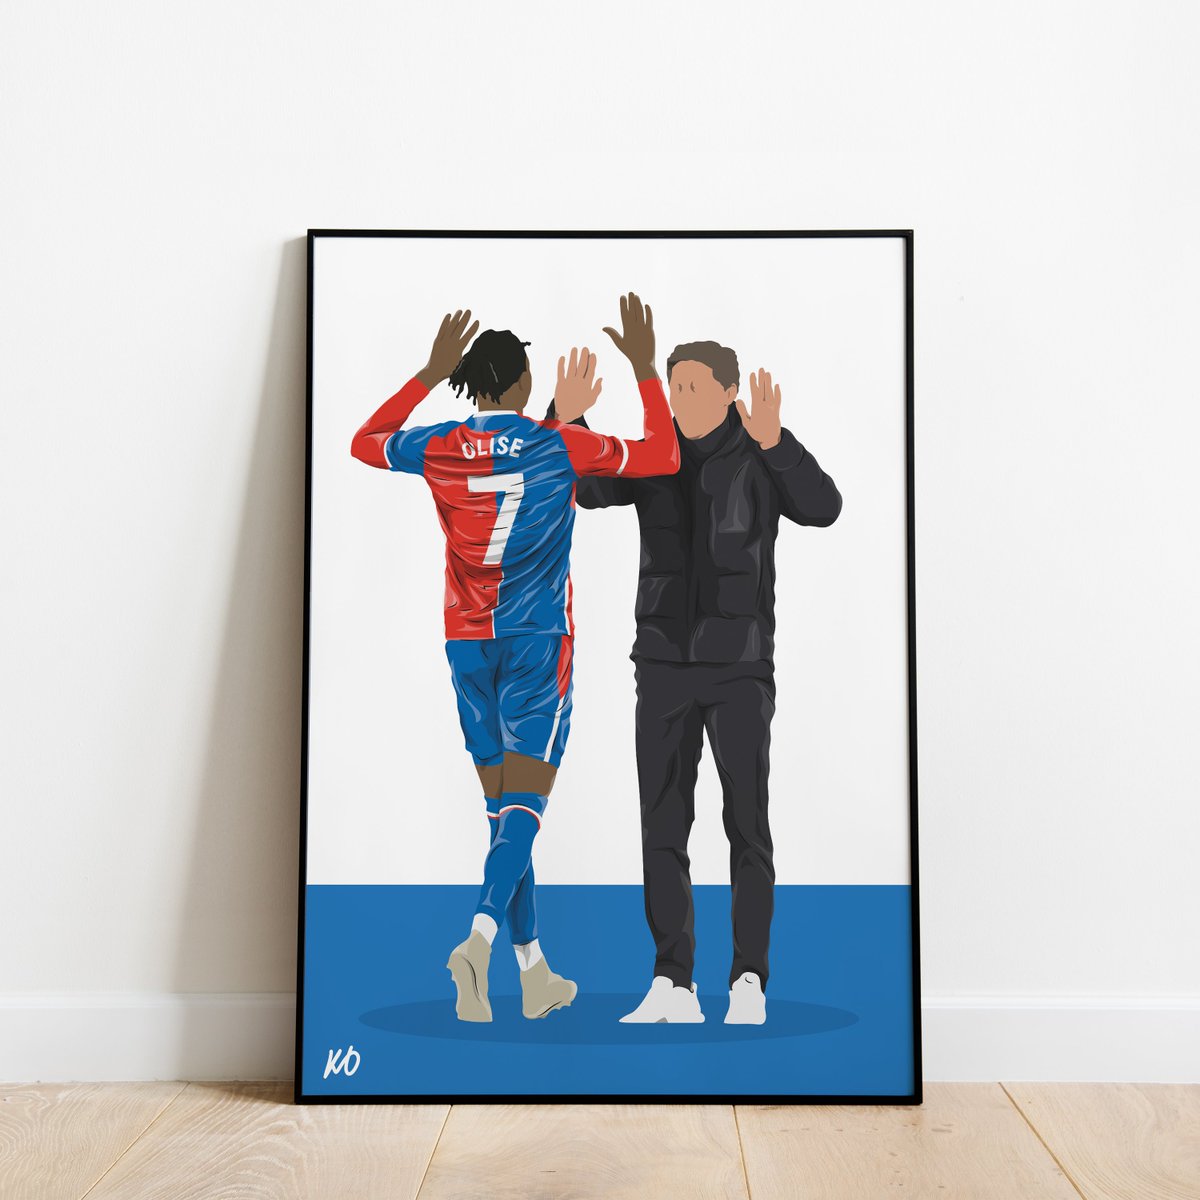 #CPFC fans, Glasner has revitalised the Palace team, so I thought i'd release a print of him!

Olise x Glasner celebration from the United game the other day (was a painful one for me to illustrate 😅)

#glasner #olise #CRYMUN